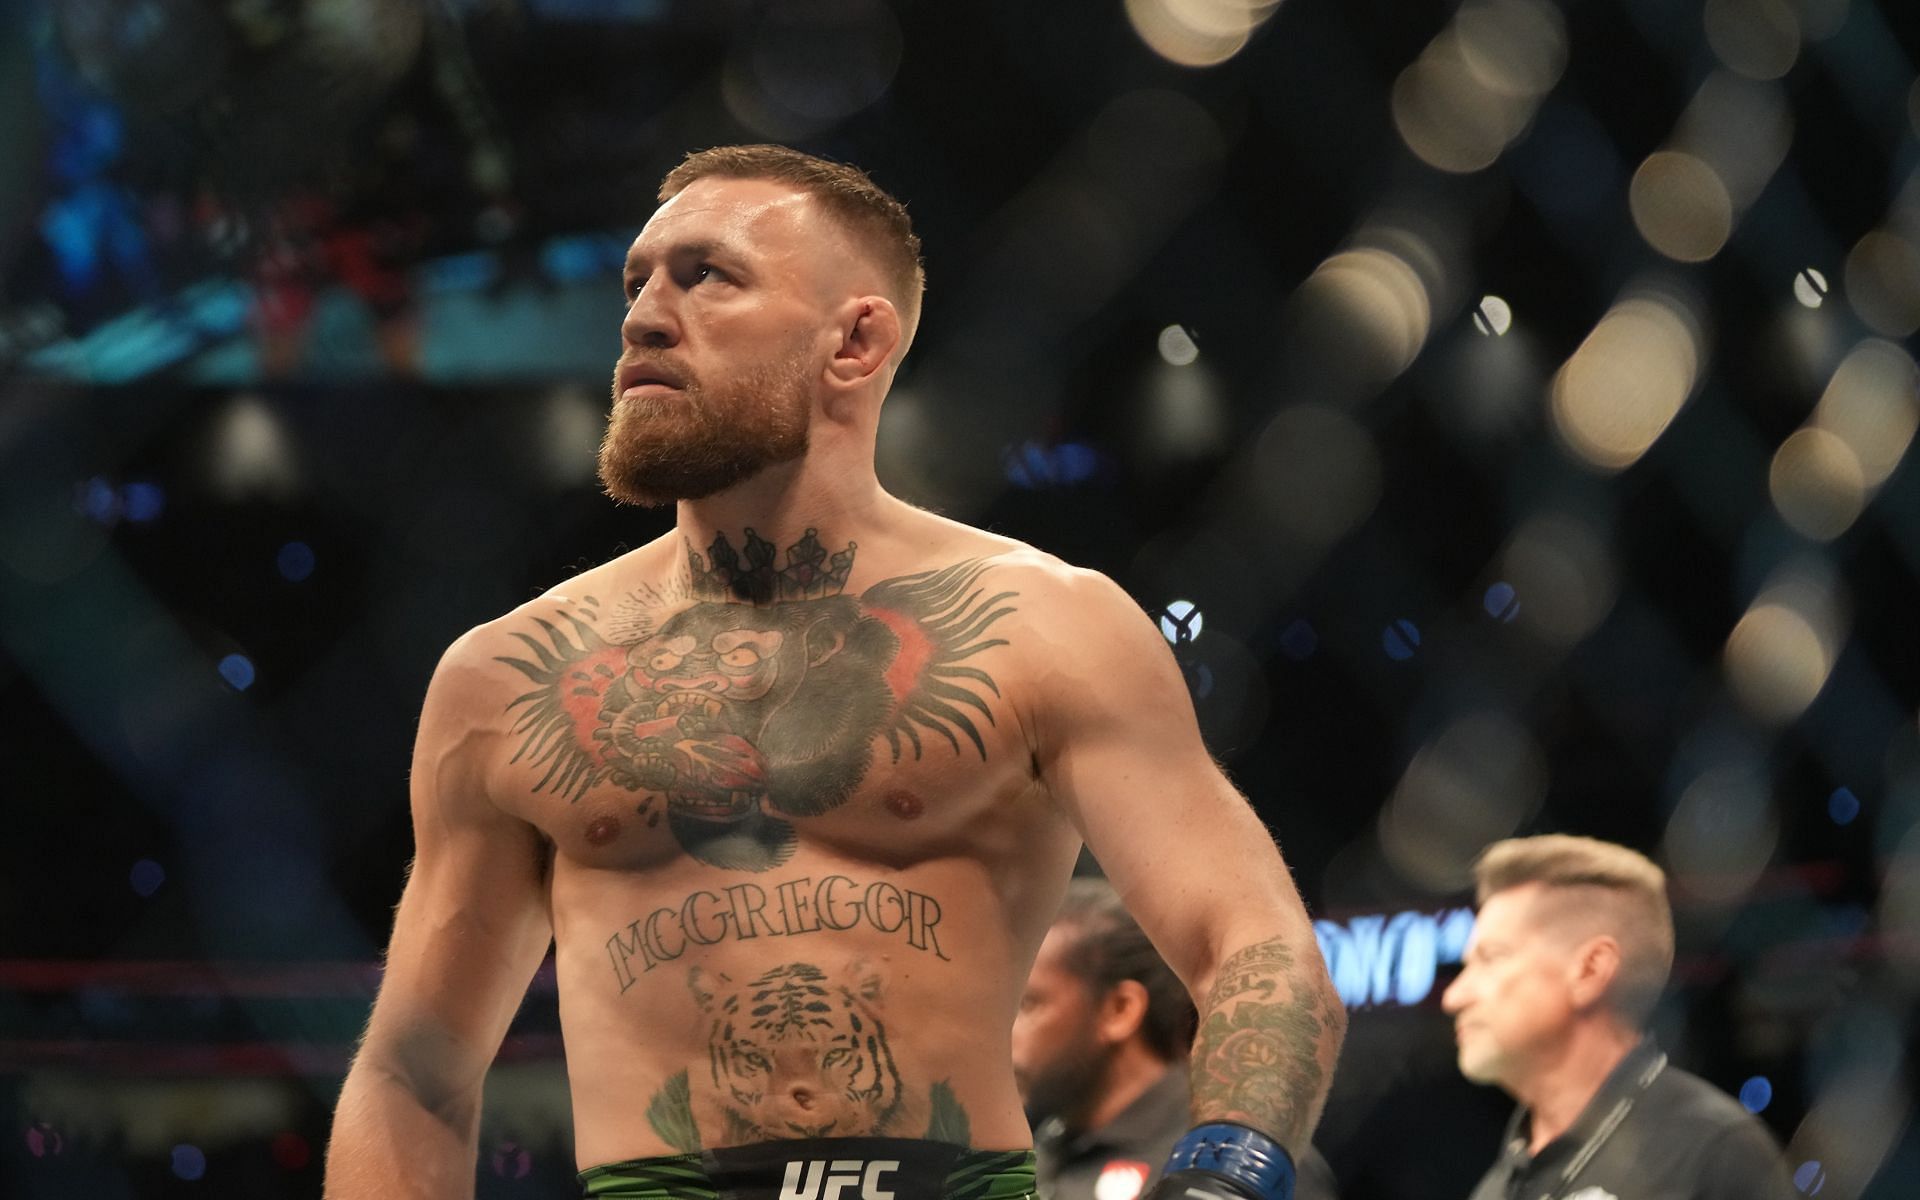 Does Conor McGregor deserve more respect than he currently gets from fans?